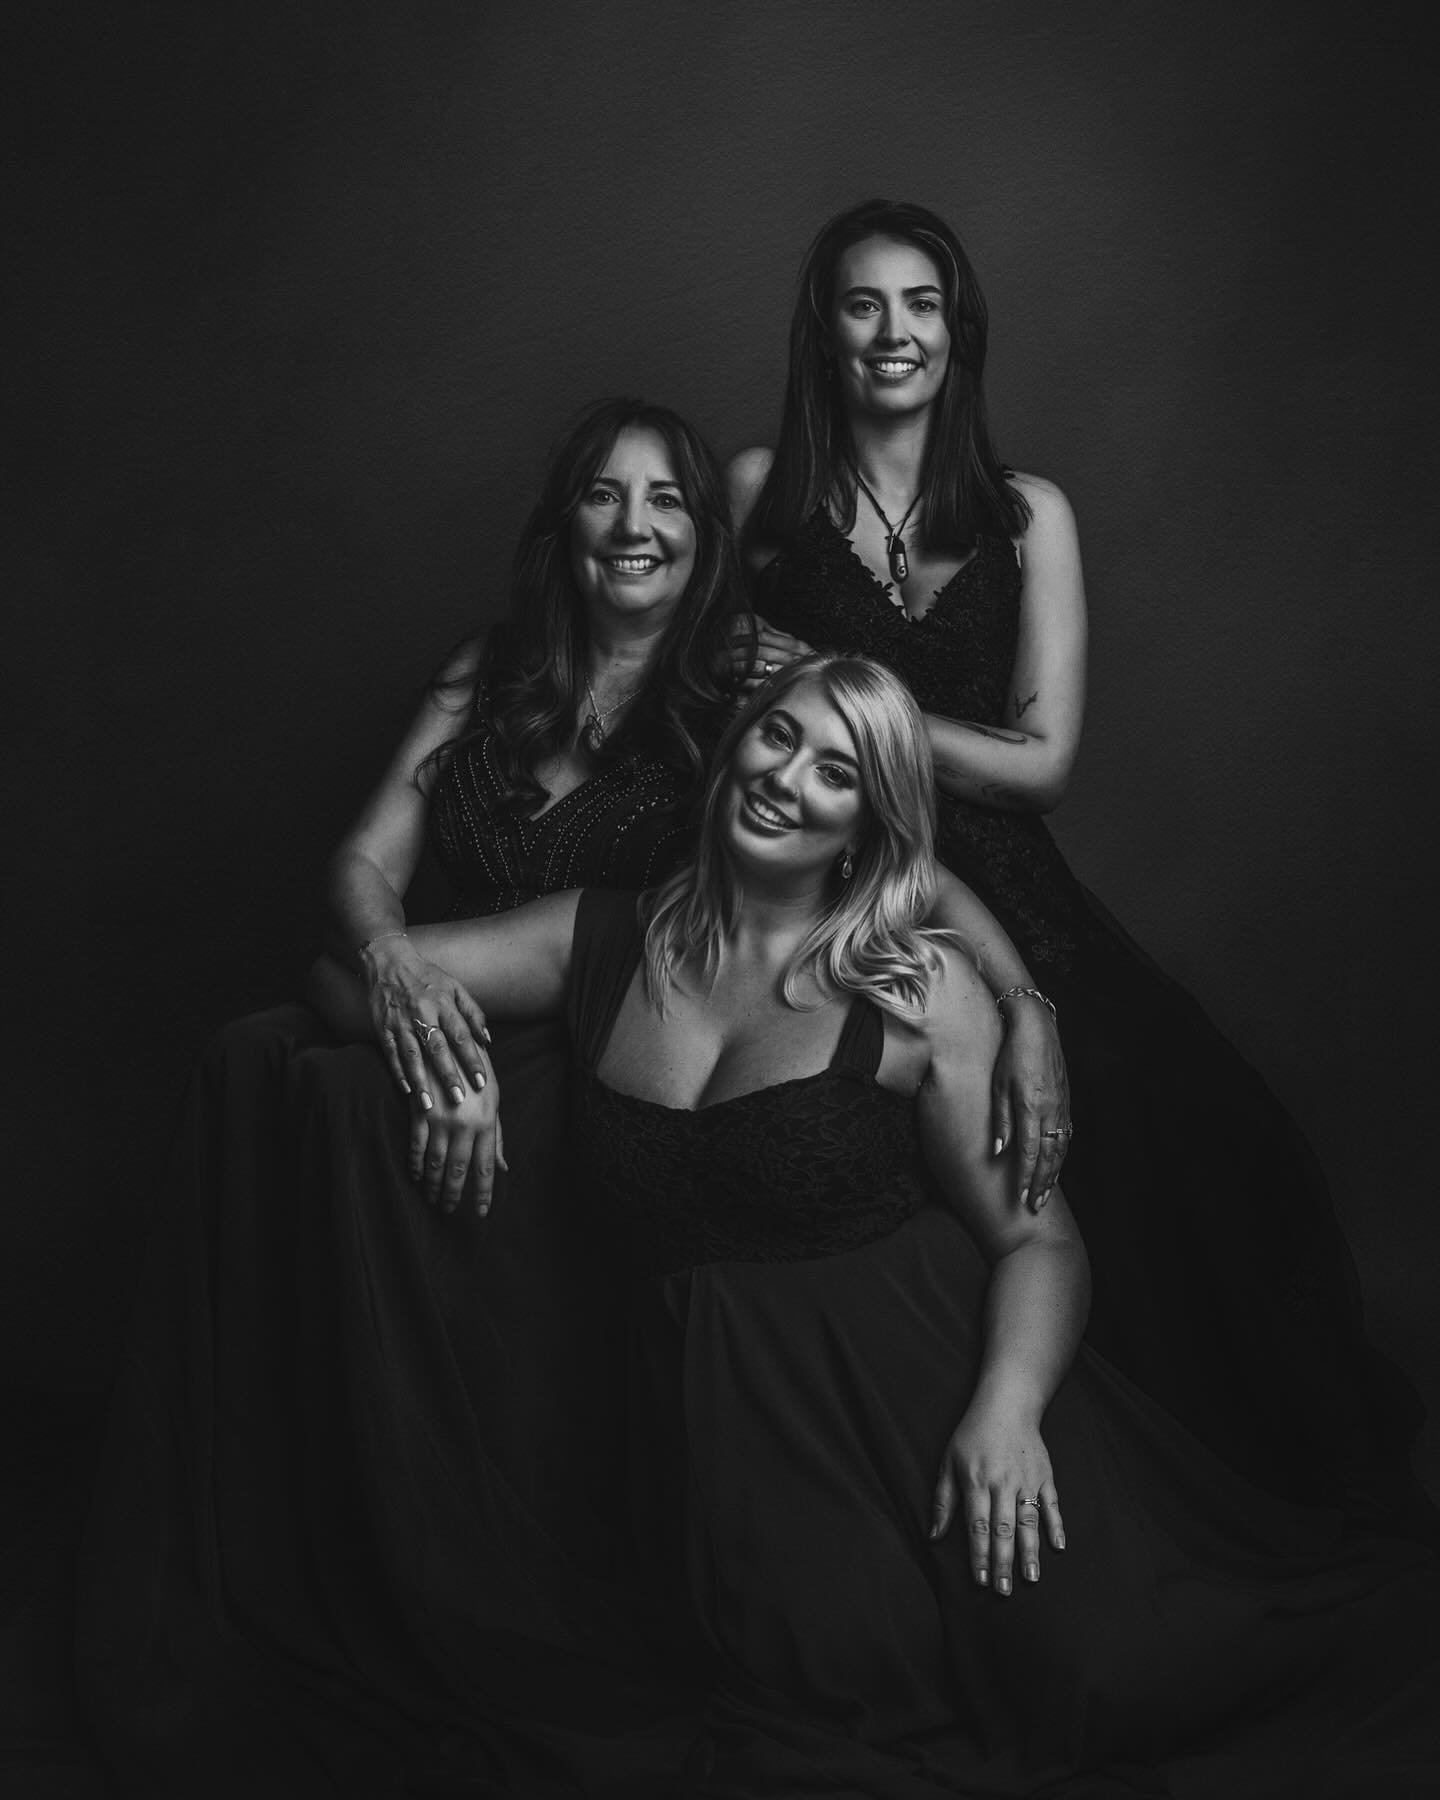 Vicki, Moni and Mikki looking stunning 🥰🤩 

Love having these beauties in the studio, seems to be a regular occurrence hehe 

@kaseygeorge_makeupartist